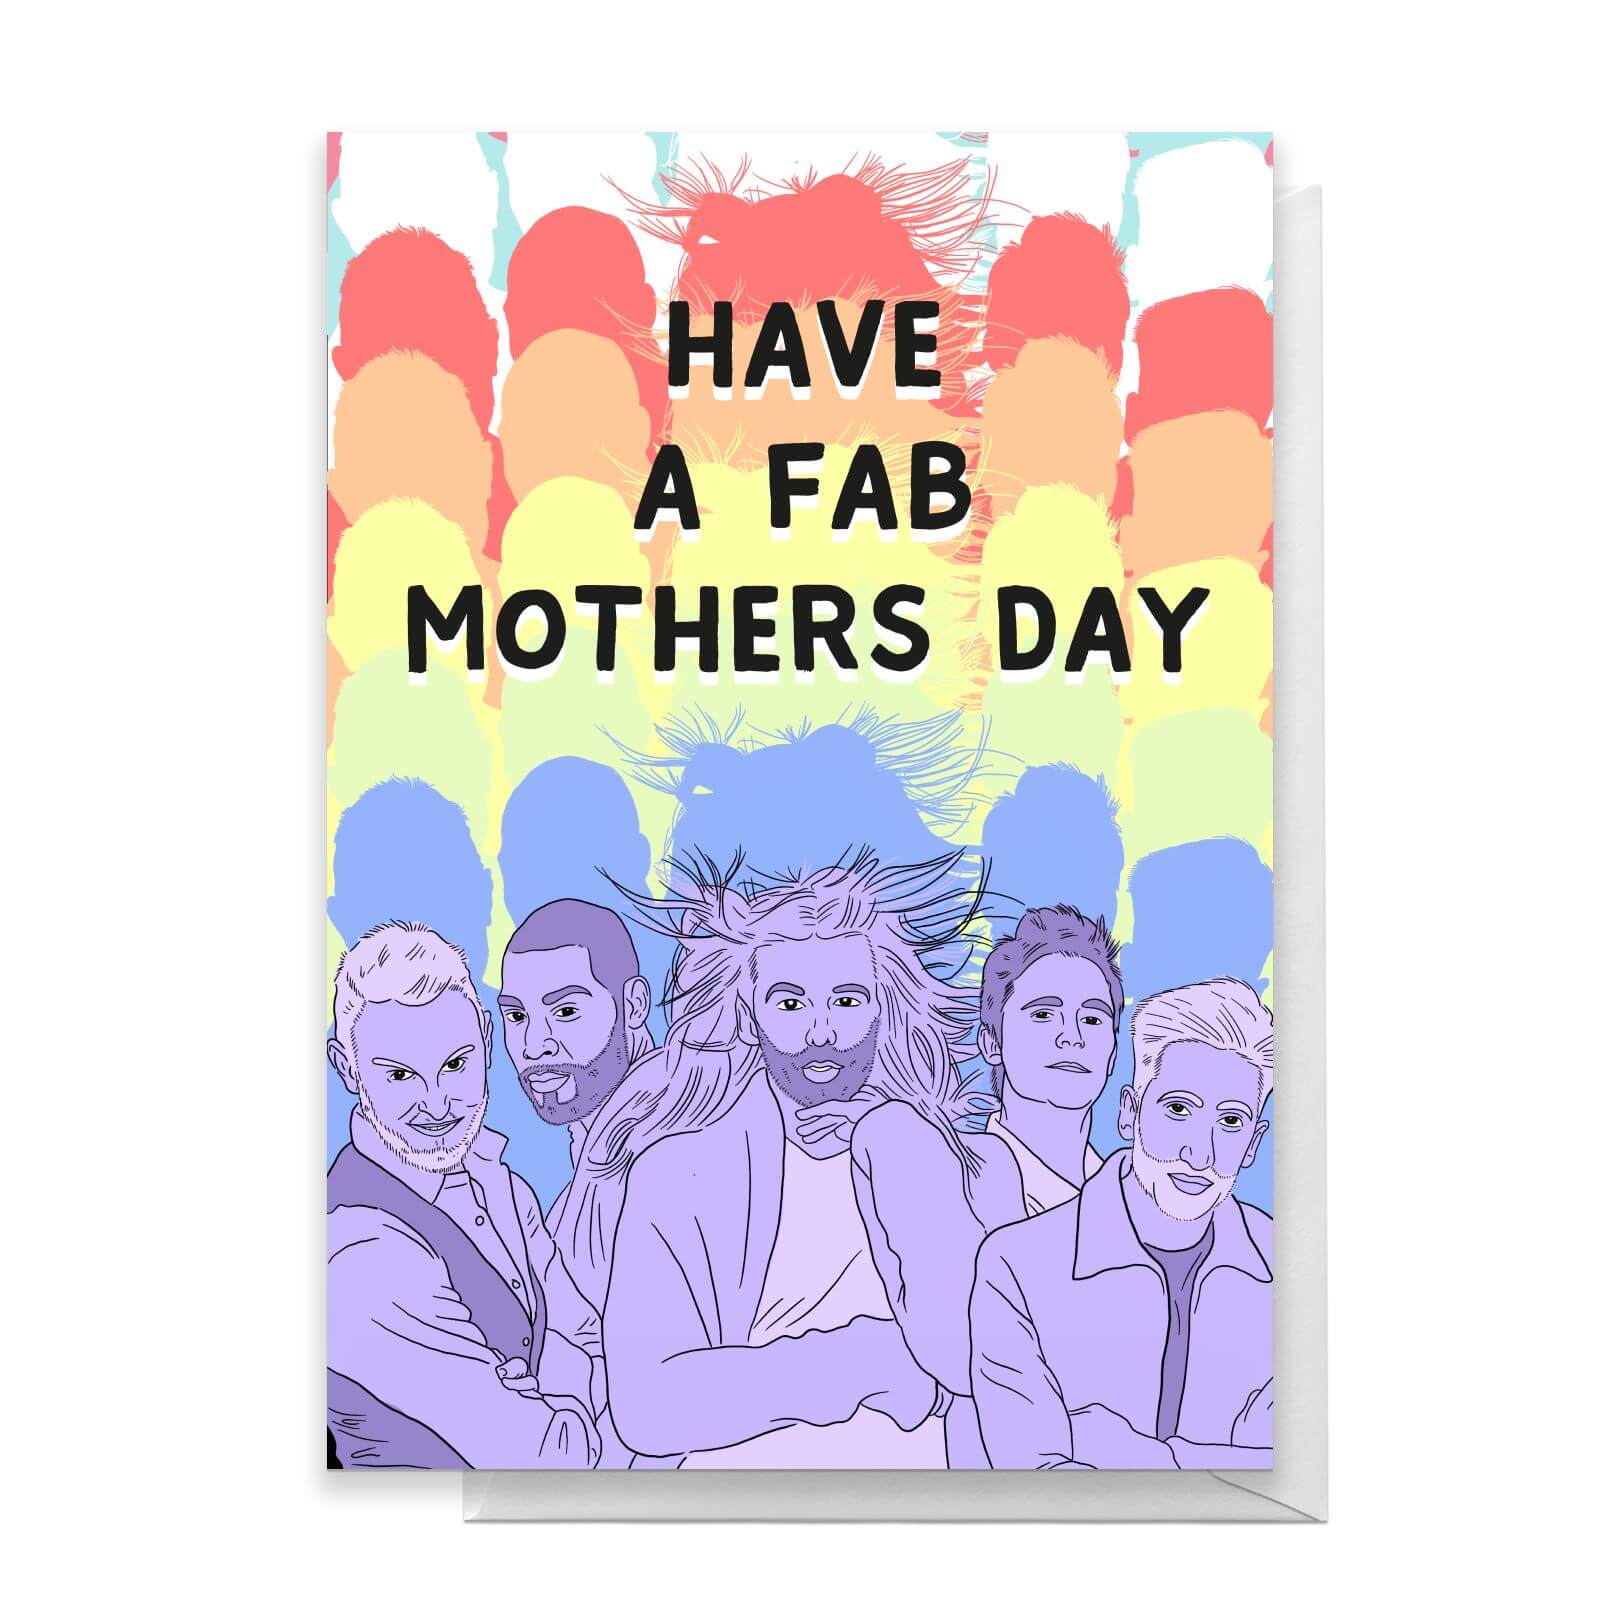 Have A Fab Mothers Day Greetings Card - Standard Card